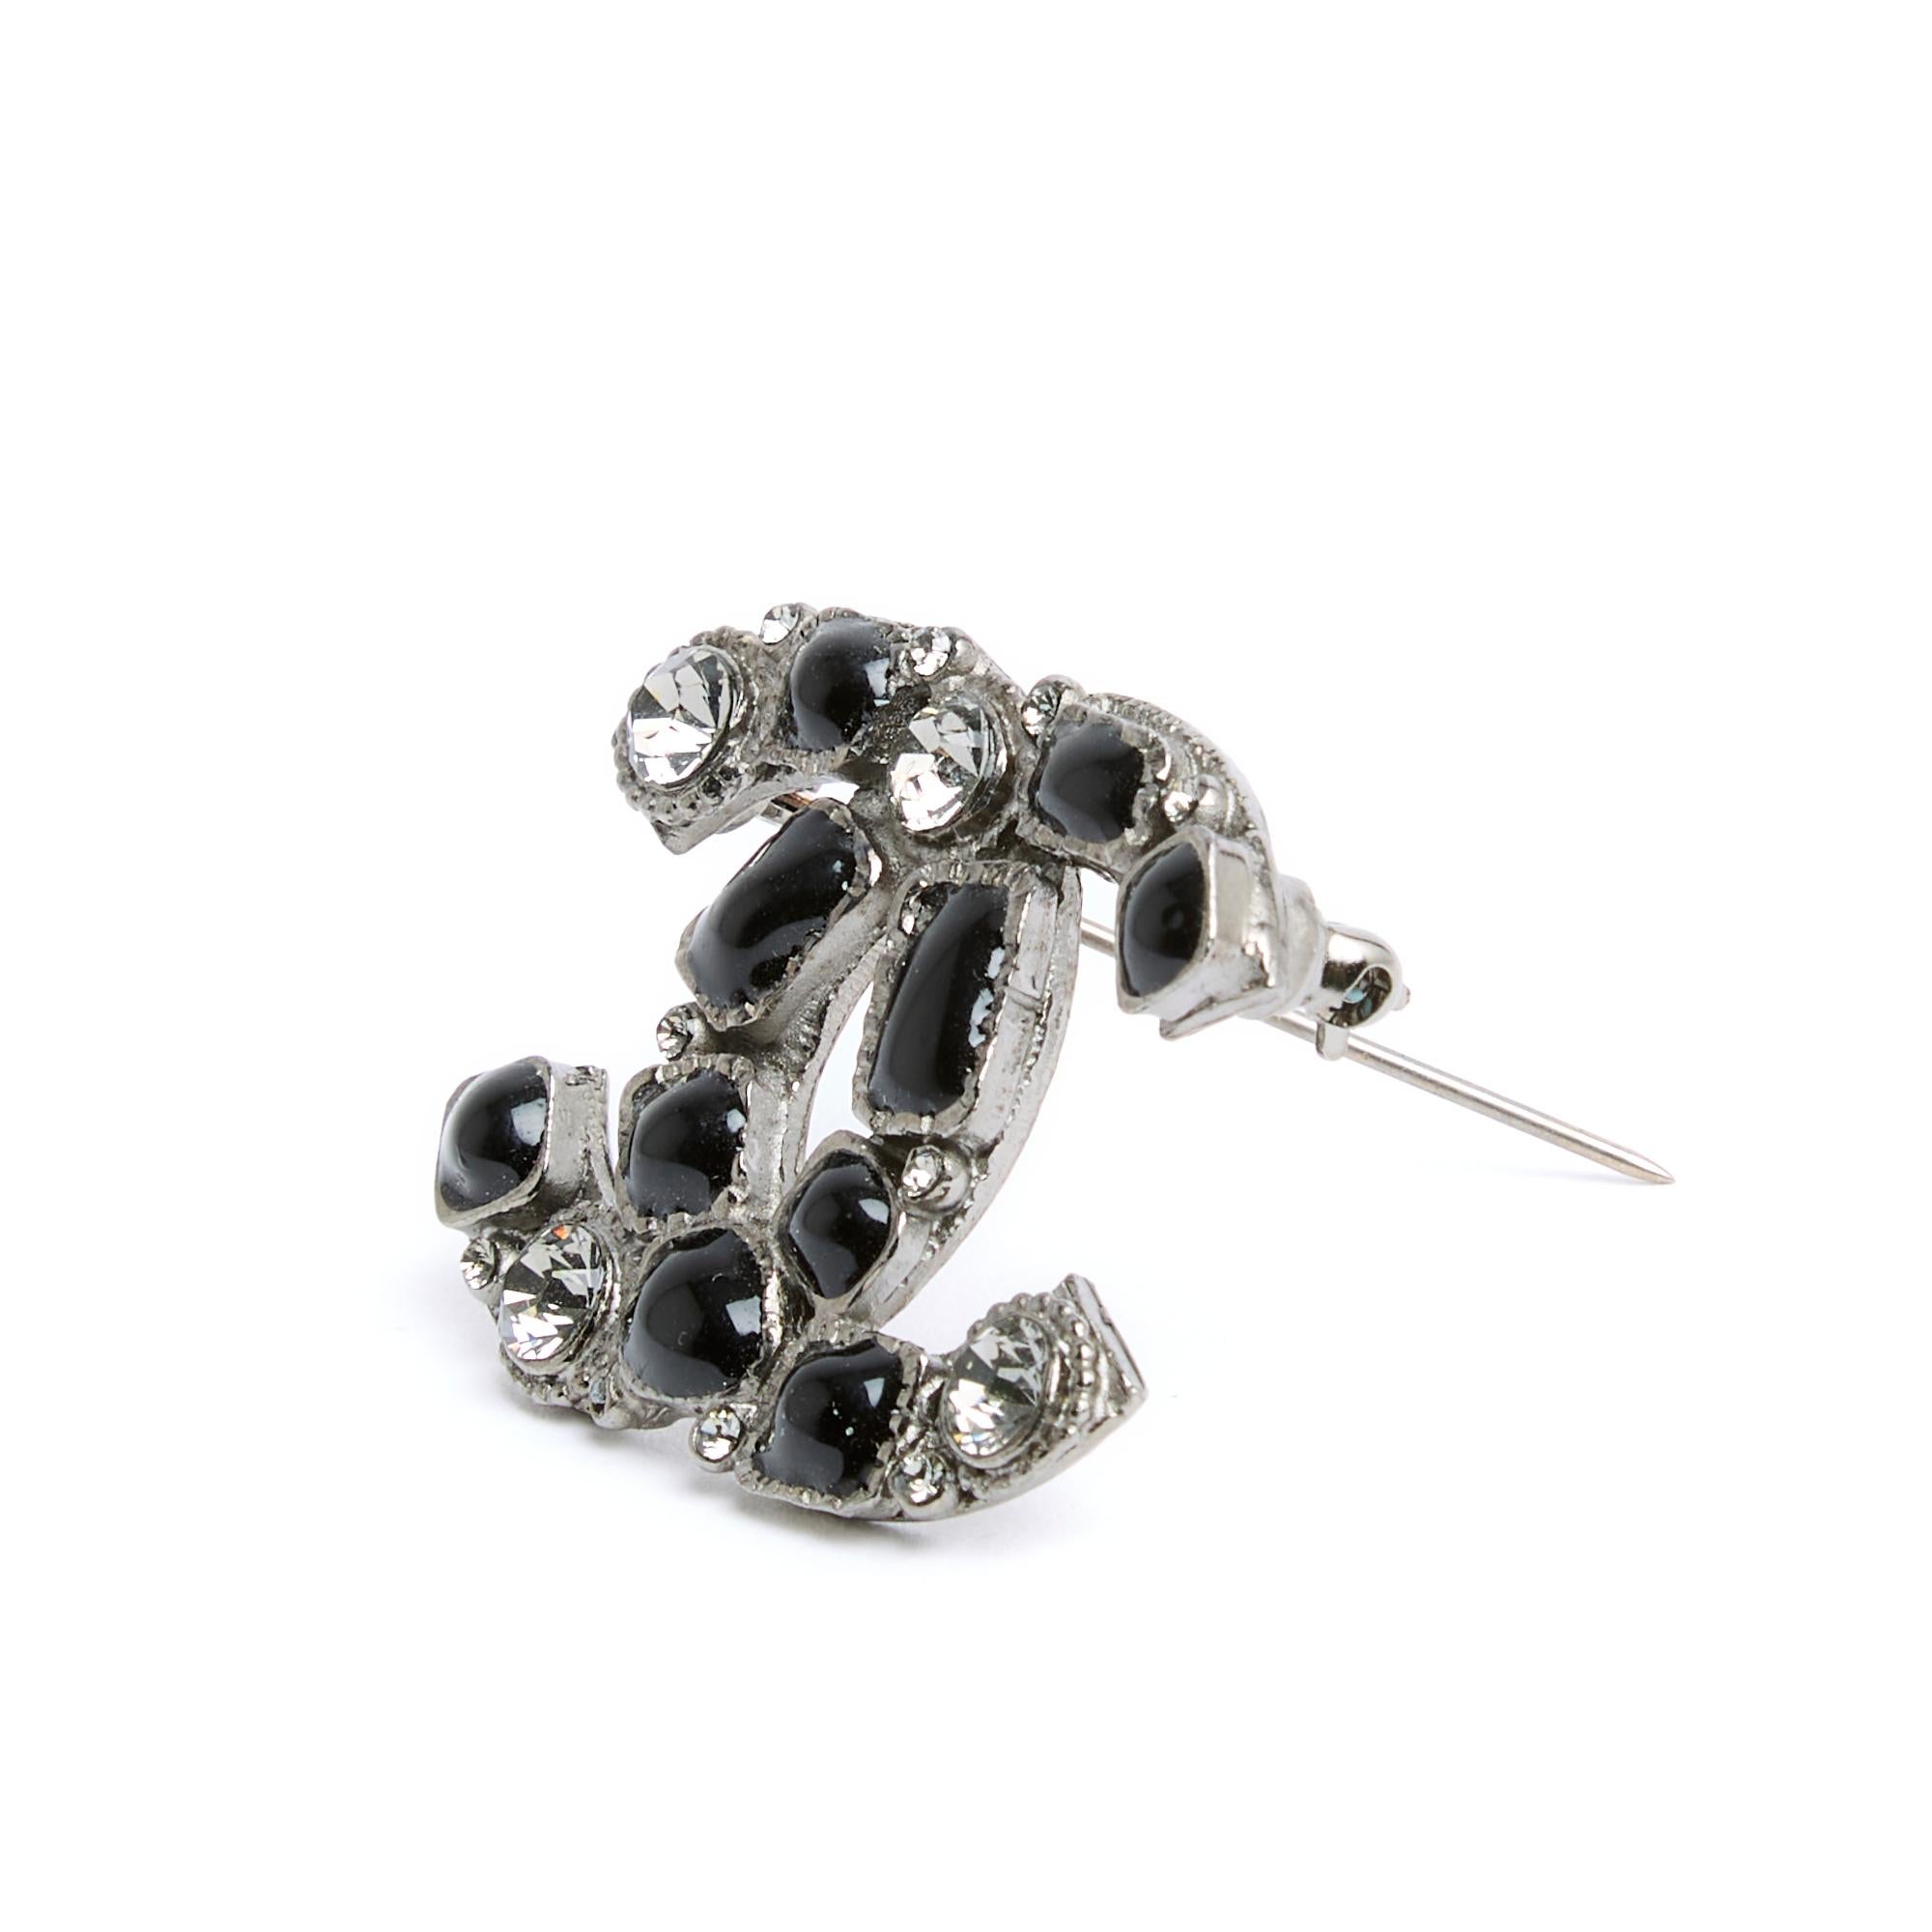 Chanel brooch from the Spring Summer 2009 collection with the CC logo motif in blackened silver metal decorated with gray rhinestones and black enameled cabochons. Width 3.7 cm x height 2.9 cm. The brooch is delivered without original packaging or